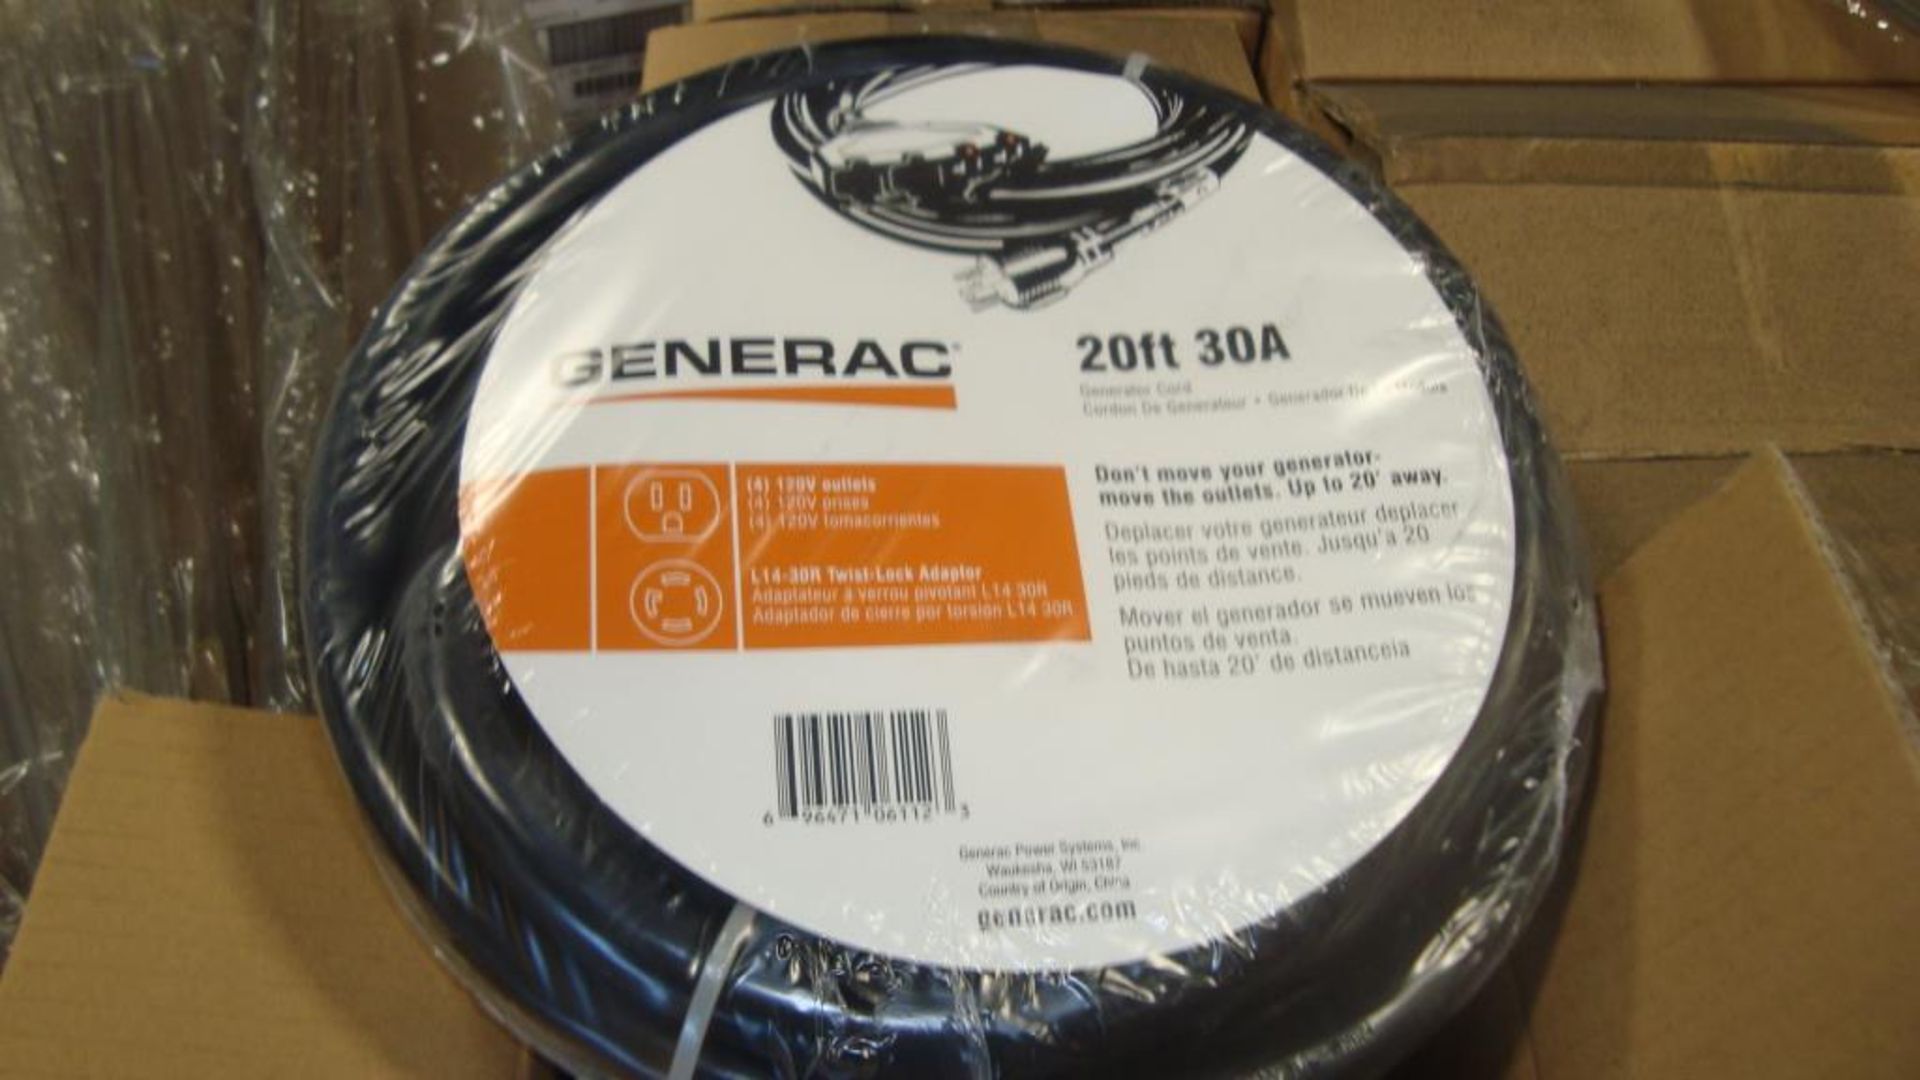 Extension Cords. Lot: 90 Total (45 Boxes - 2 ea.) Generac pn# 0061121-1 20ft, 30A Power Distribution - Image 2 of 8